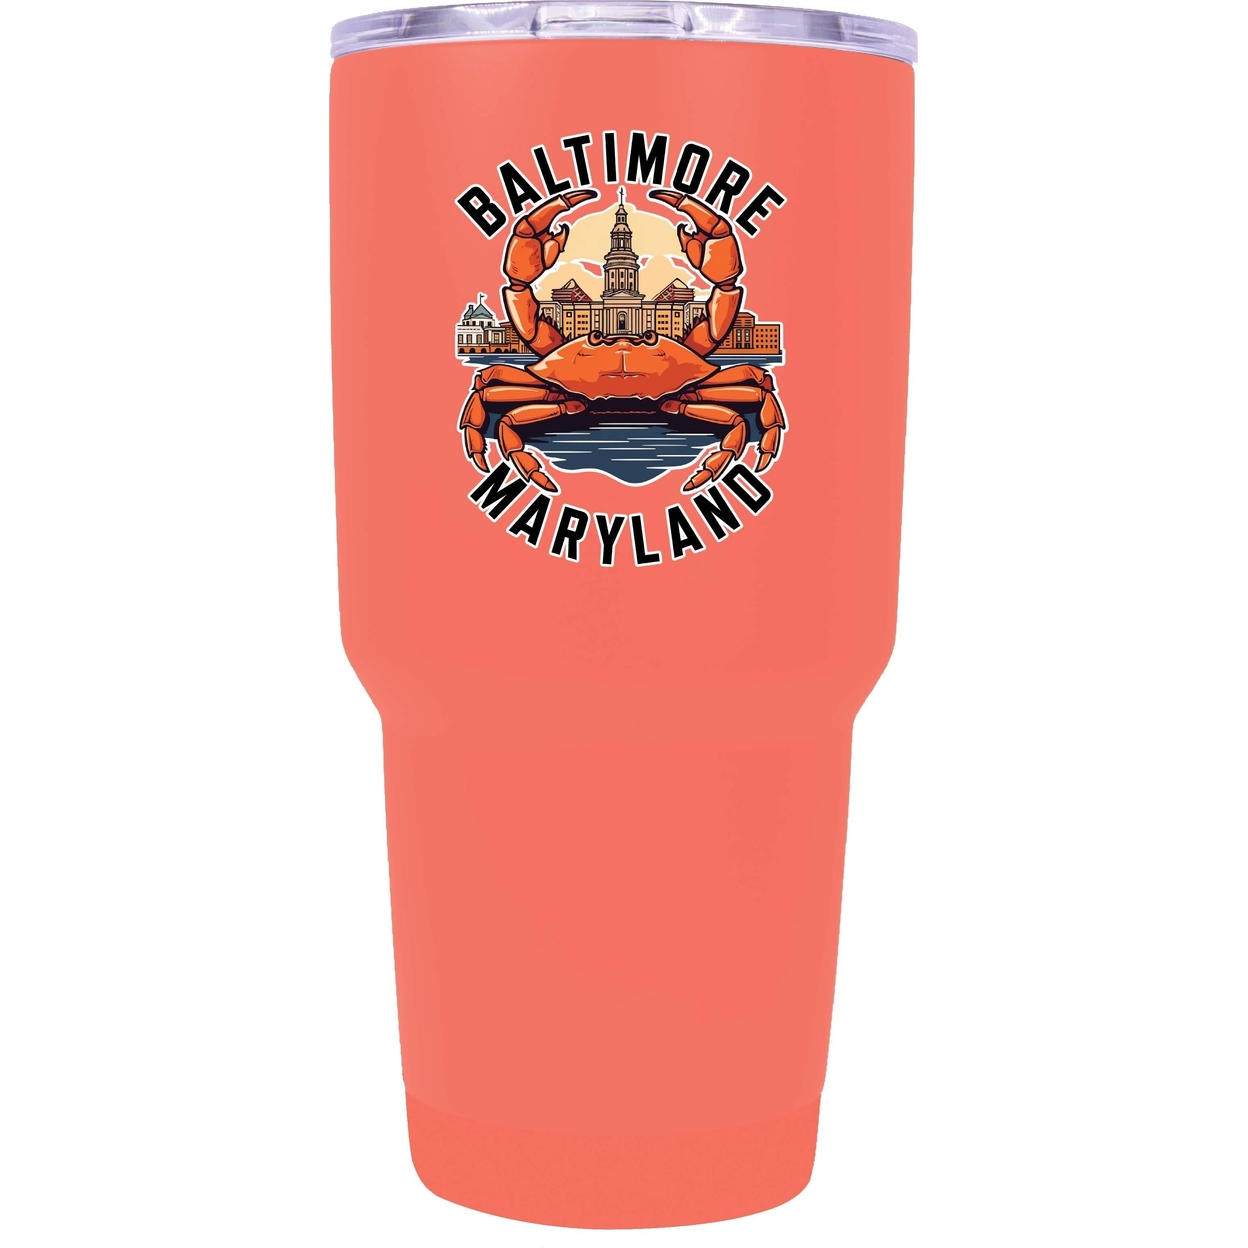 Baltimore Maryland D Souvenir 24 Oz Insulated Tumbler - Coral,,2-Pack